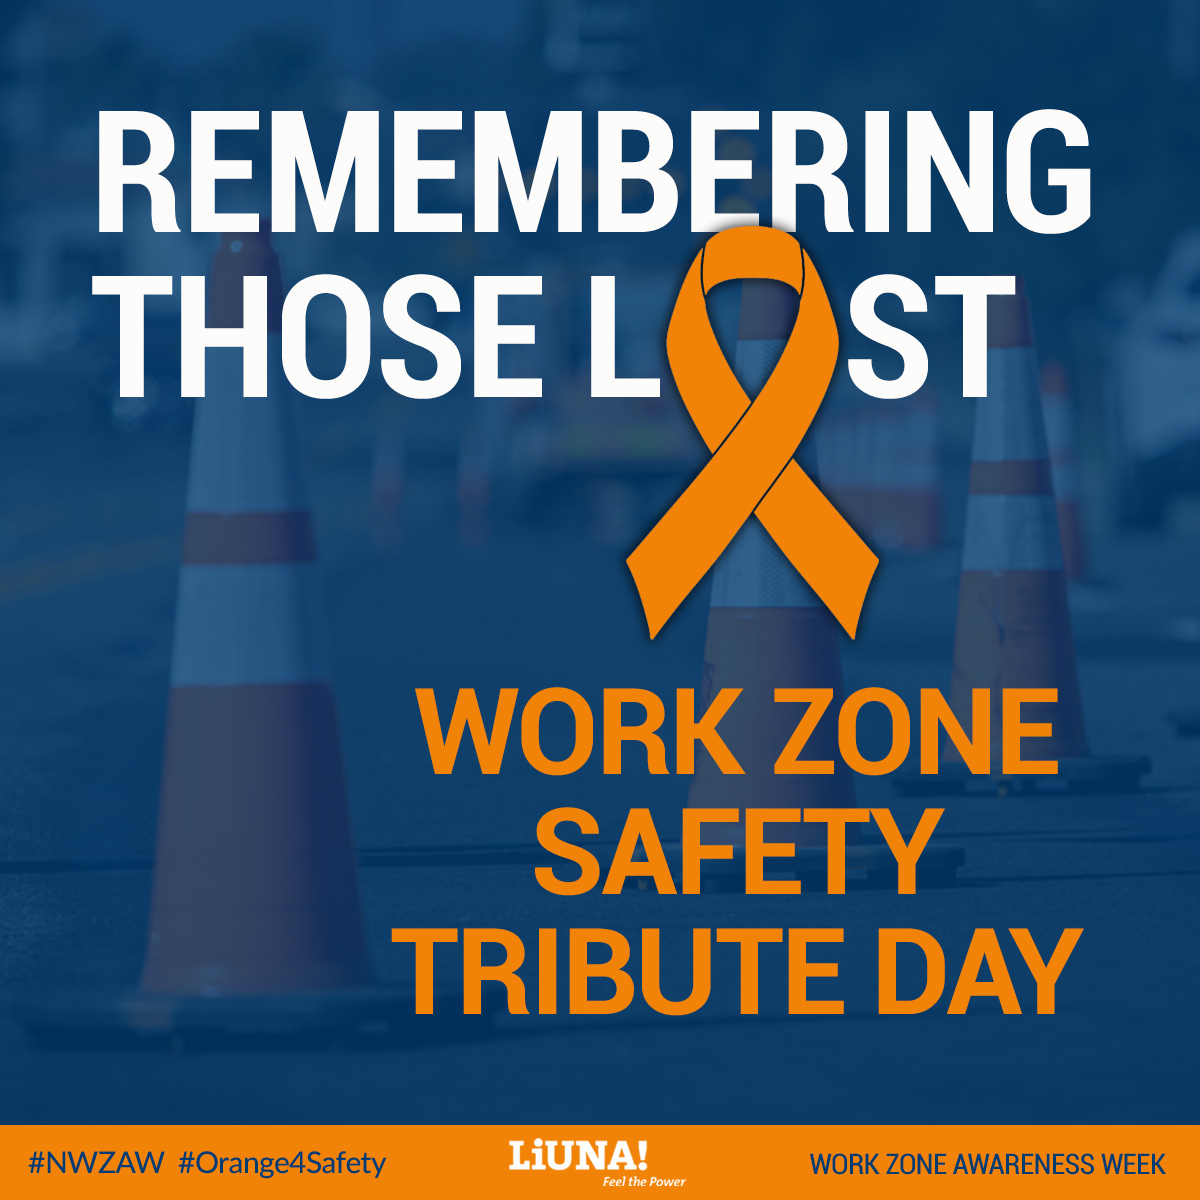 Remembering Those Lost: Work Zone Safety Tribute Day. 

#NWZAW #Orange4Safety